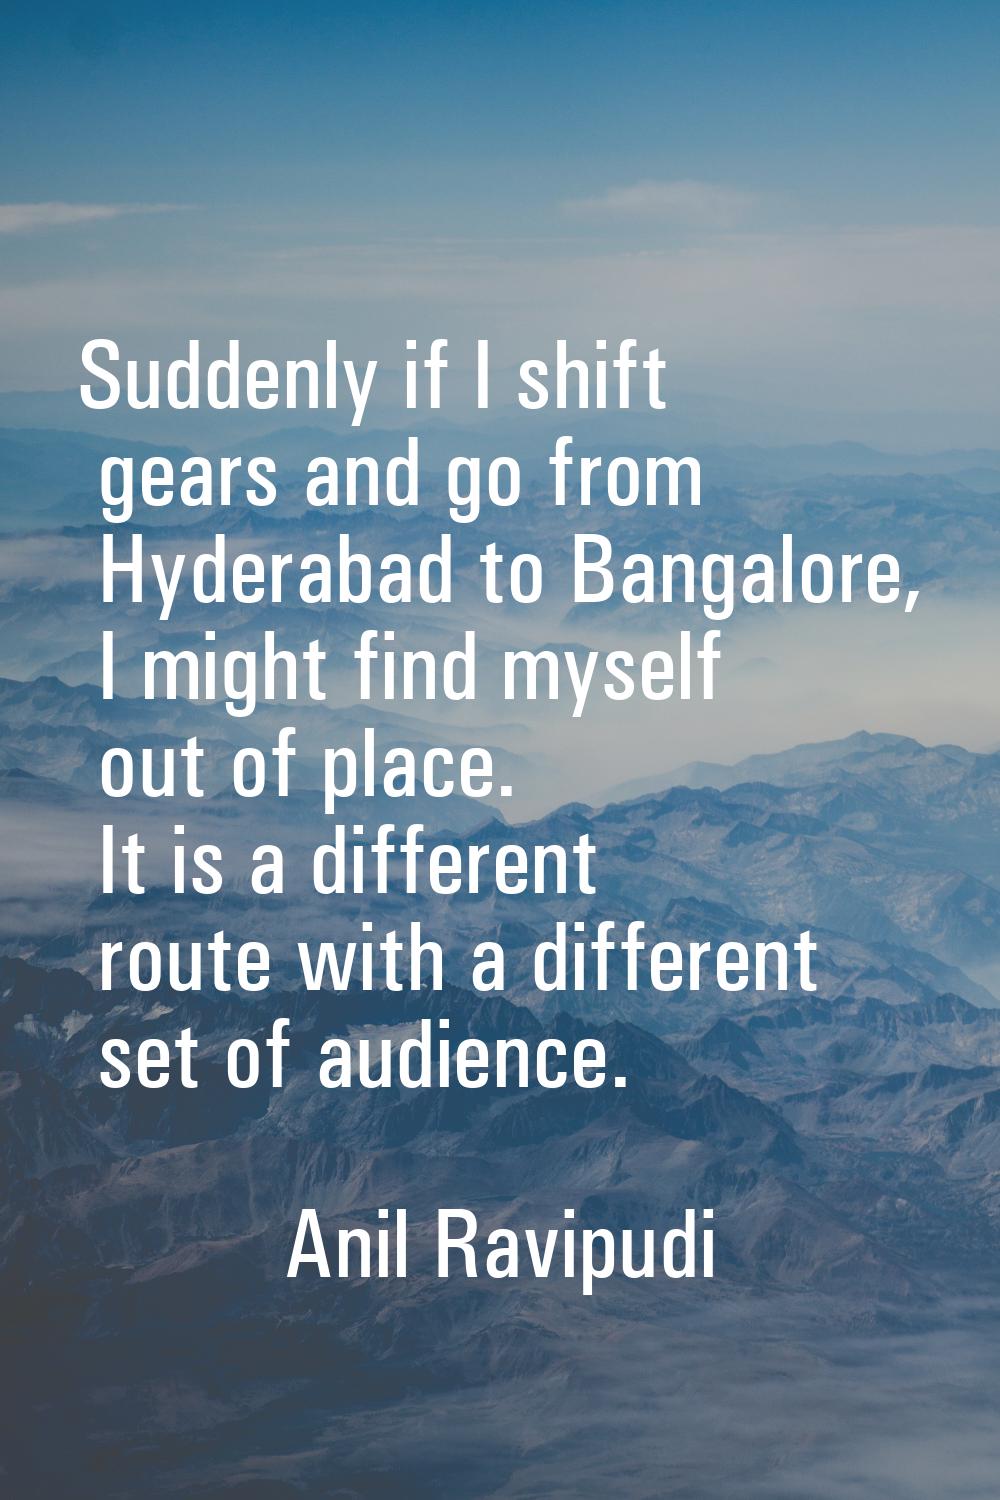 Suddenly if I shift gears and go from Hyderabad to Bangalore, I might find myself out of place. It 